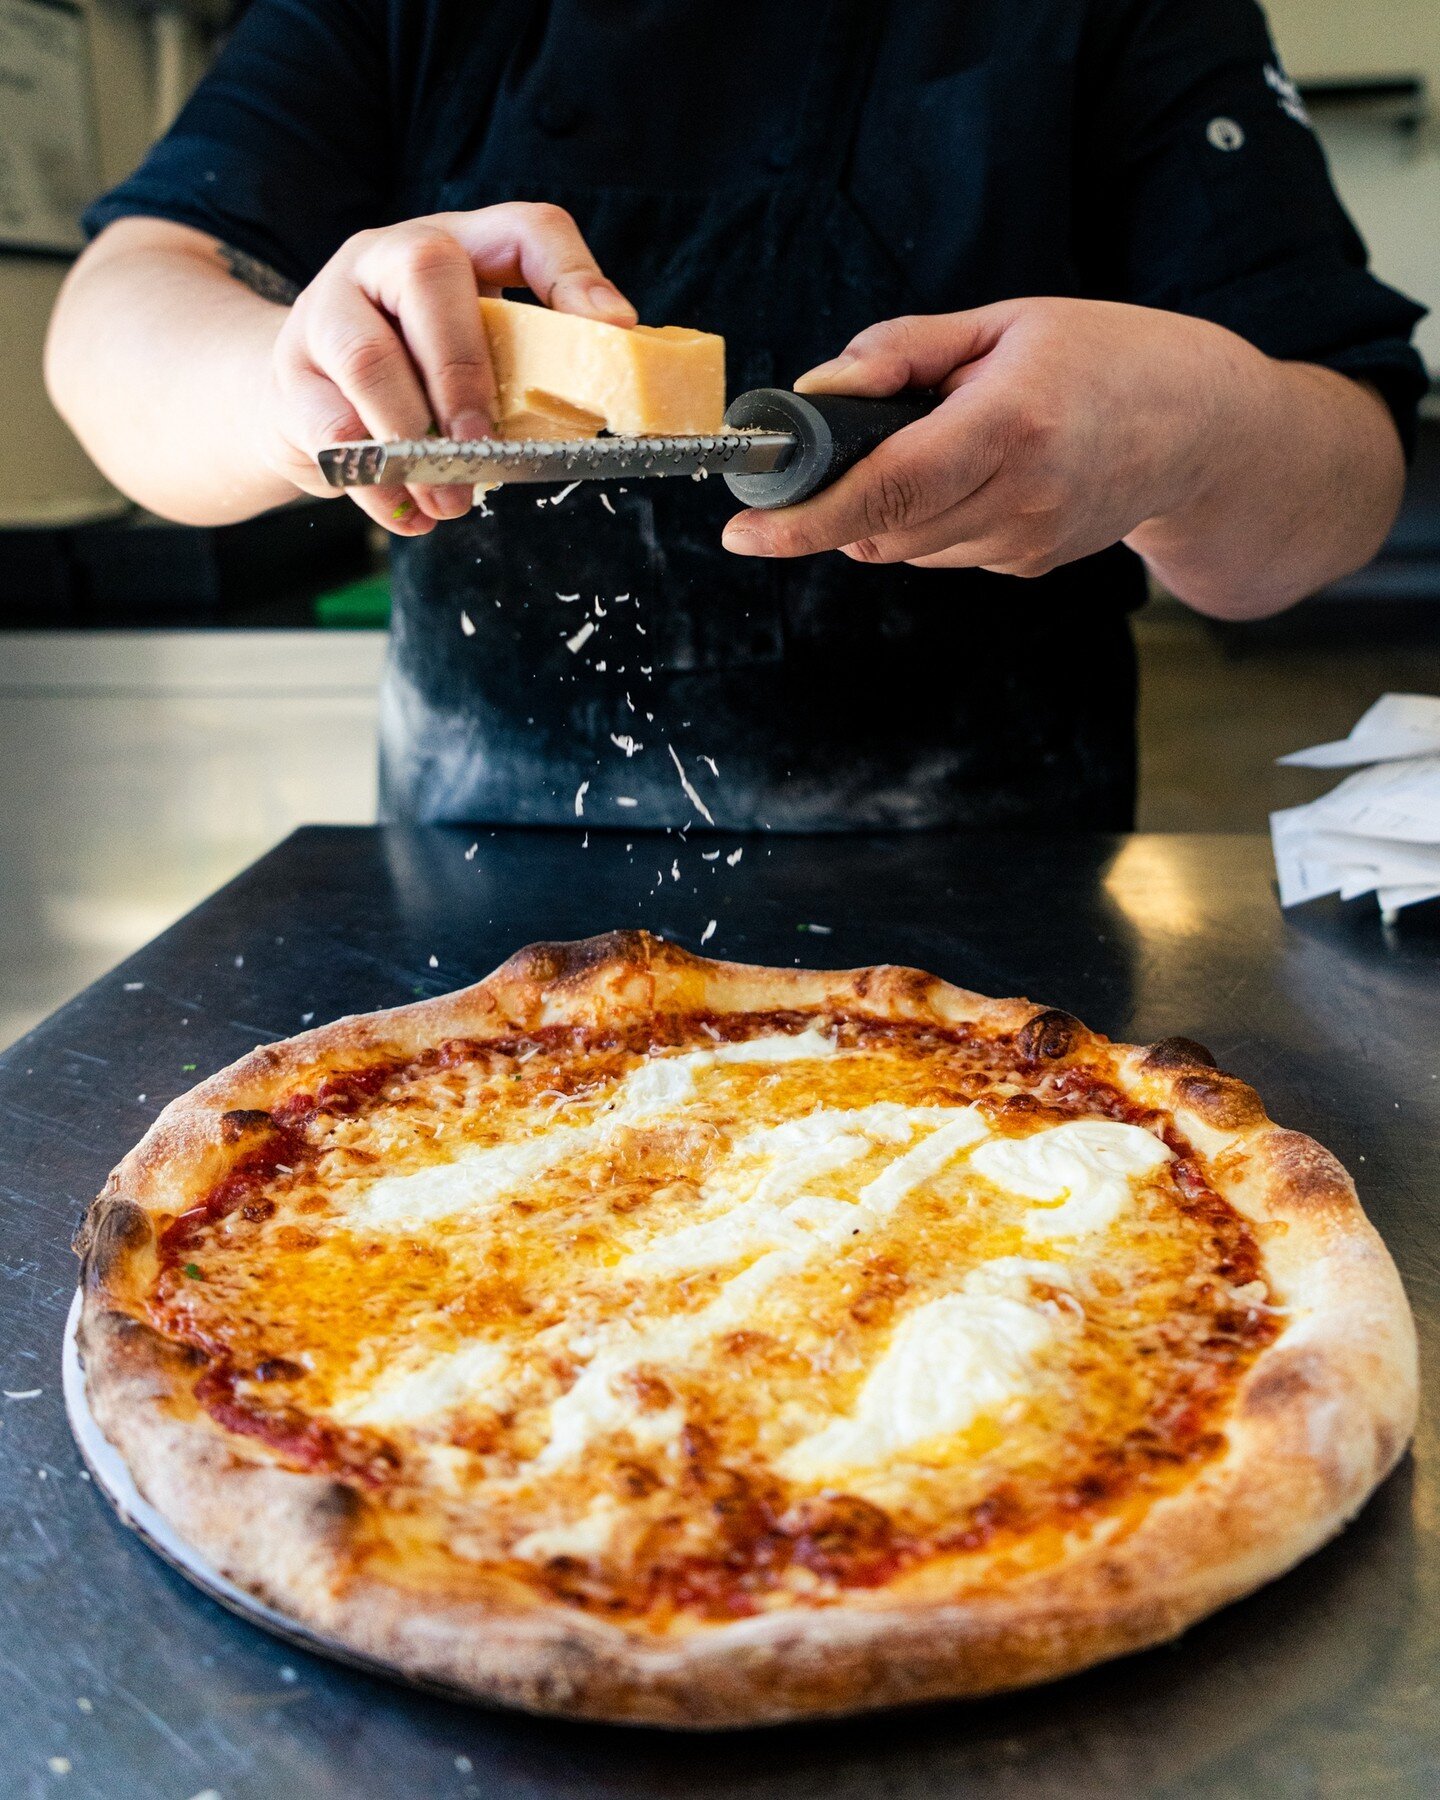 Where did the cheese go on vacation? The Golden Grate Bridge!⁠ 🌉 
⁠
🧀 Cheese puns aside, our Four Cheese &amp; Garlic pizza is a must for #cheeselovers. Made with provolone, fontina, cheddar and mozzarella, piled on top of our house tomato sauce wi